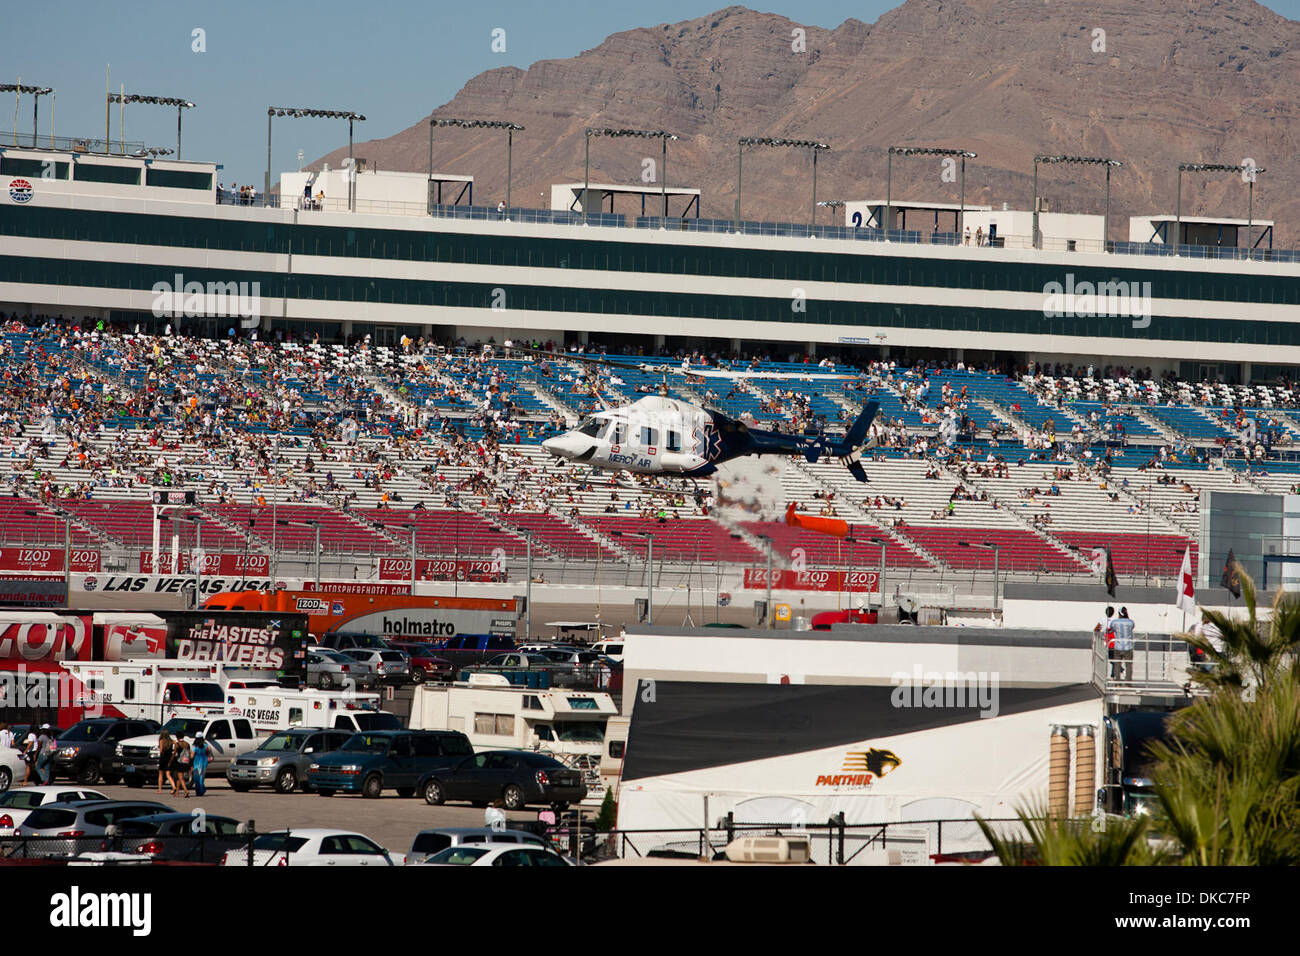 Oct. 16, 2011 - Las Vegas, Nevada, U.S - Dan Wheldon, driver of the #77 Bowers & Wilkins Honda, is being air lifted to the hospital after a major crash on lap 13 during the IndyCar racing action at the IZOD IndyCar World Championships at Las Vegas Motor Speedway in Las Vegas, Nevada.  Unfortunately, Wheldon succumbed to the injuries approximately an hour after the crash. (Credit Im Stock Photo